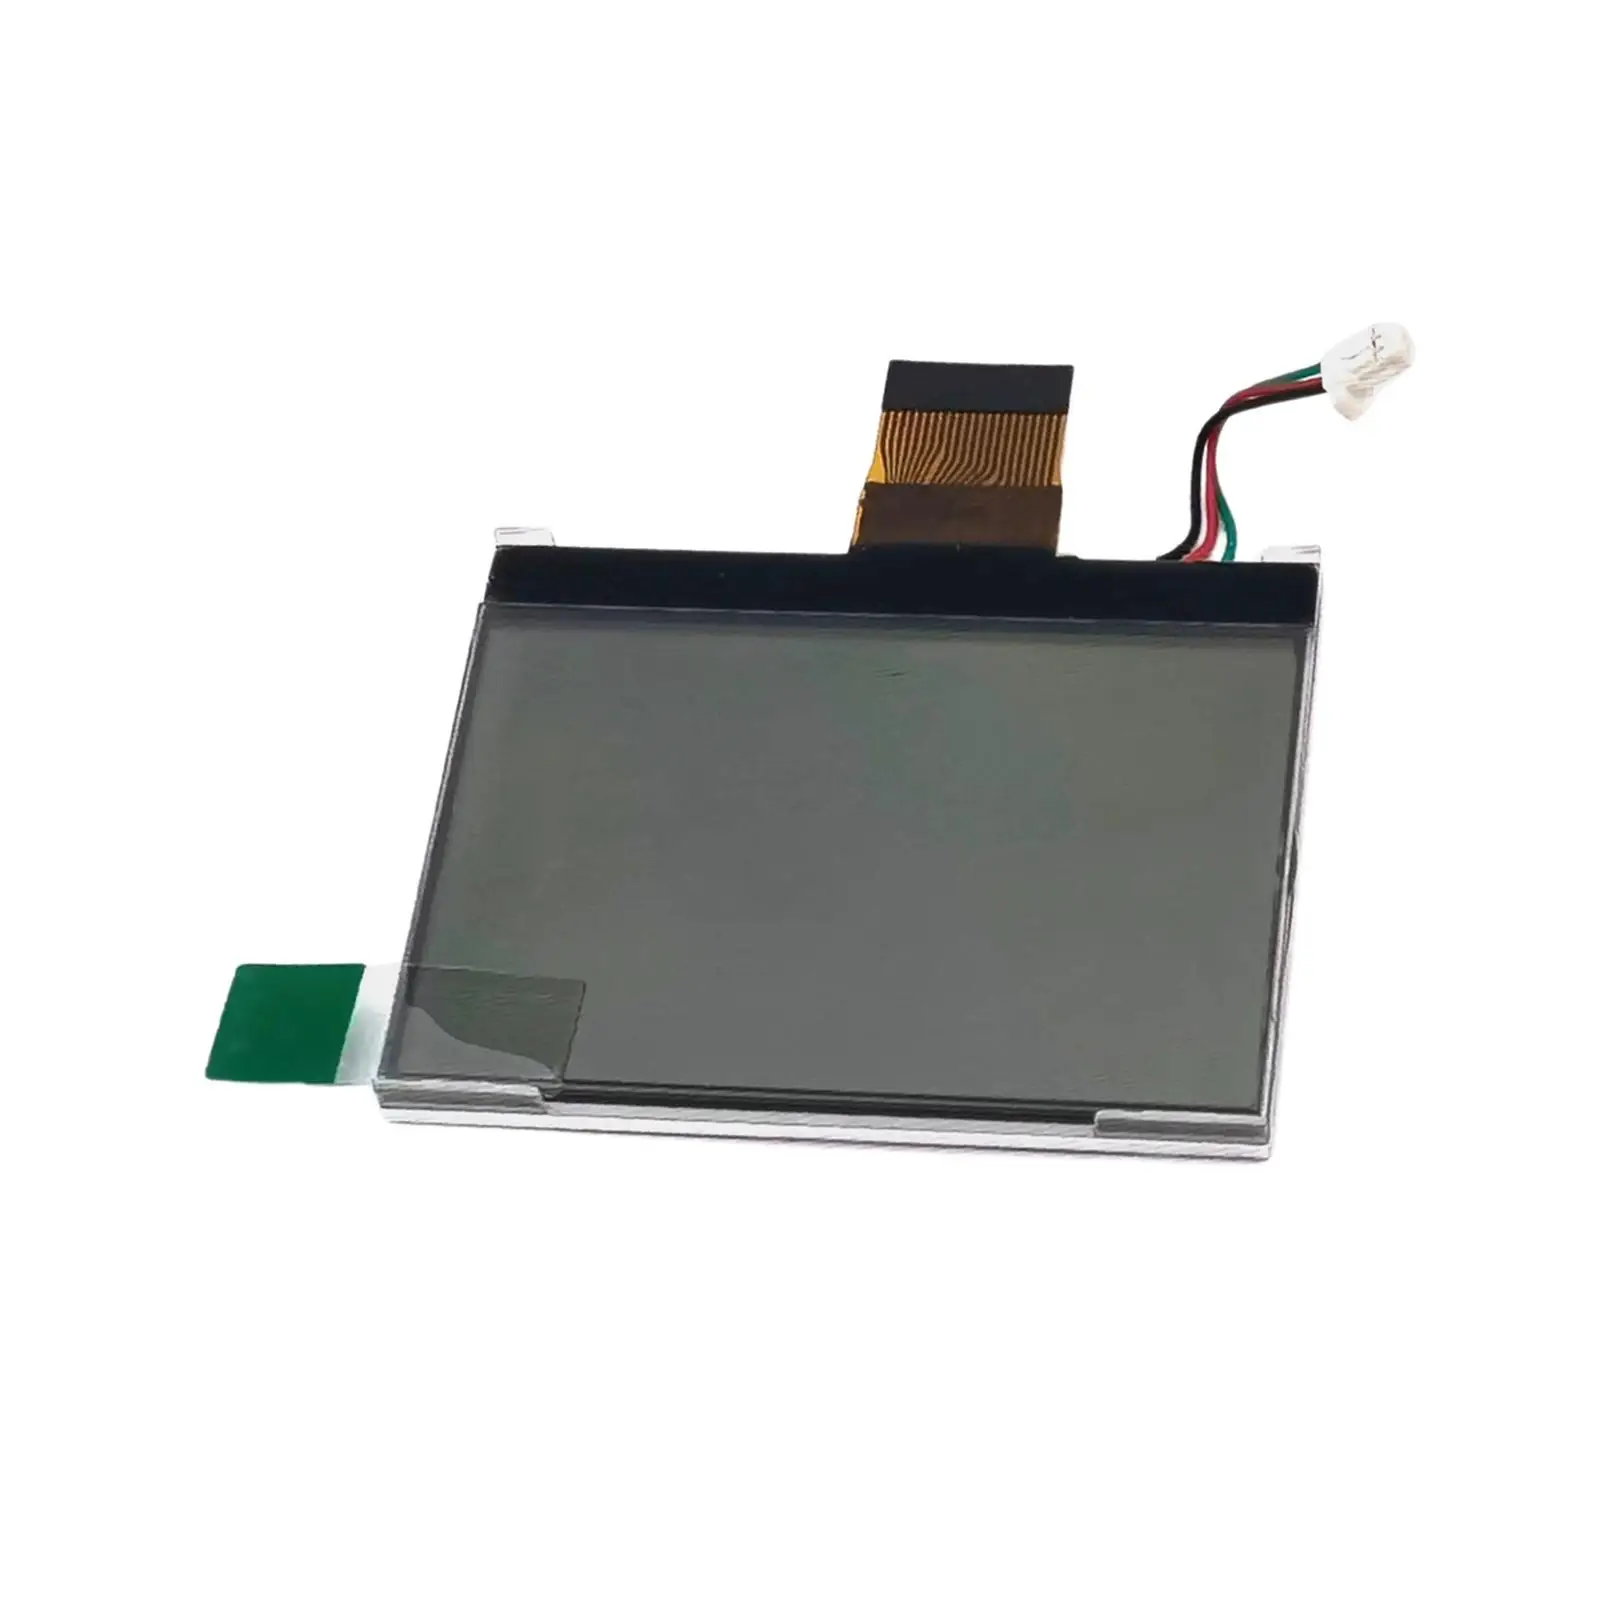 LCD Display Screen High Quality Directly Replace Flash Repair Part for V860 TT685 V860II AD360II Accessory